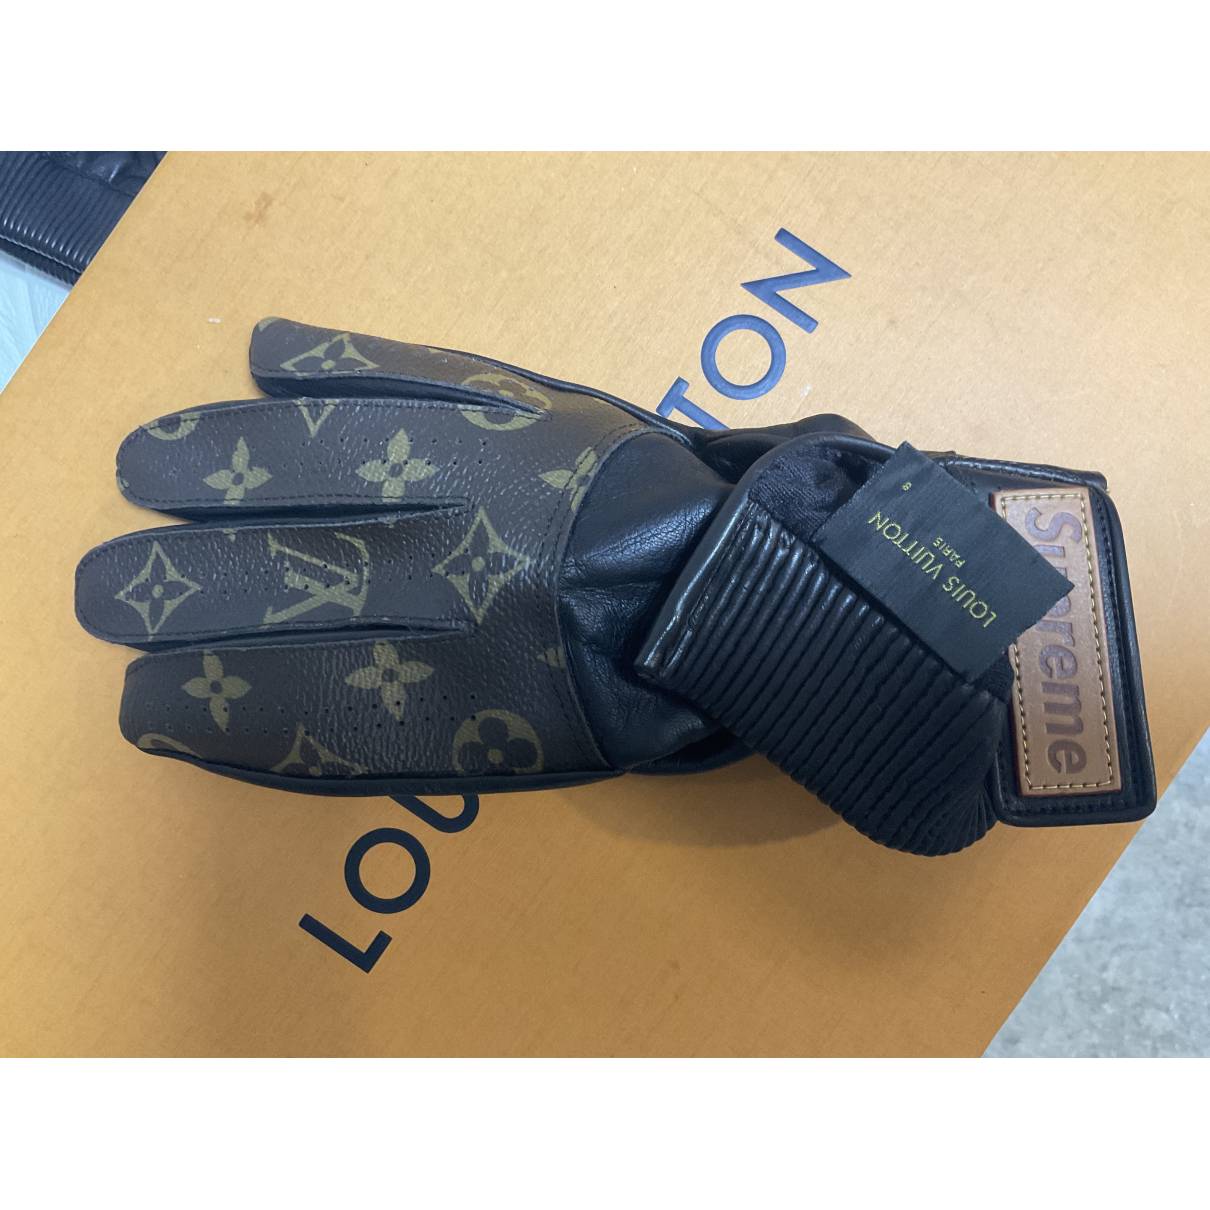 Leather gloves Louis Vuitton x Supreme Brown size 8 Inches in Leather -  32692363